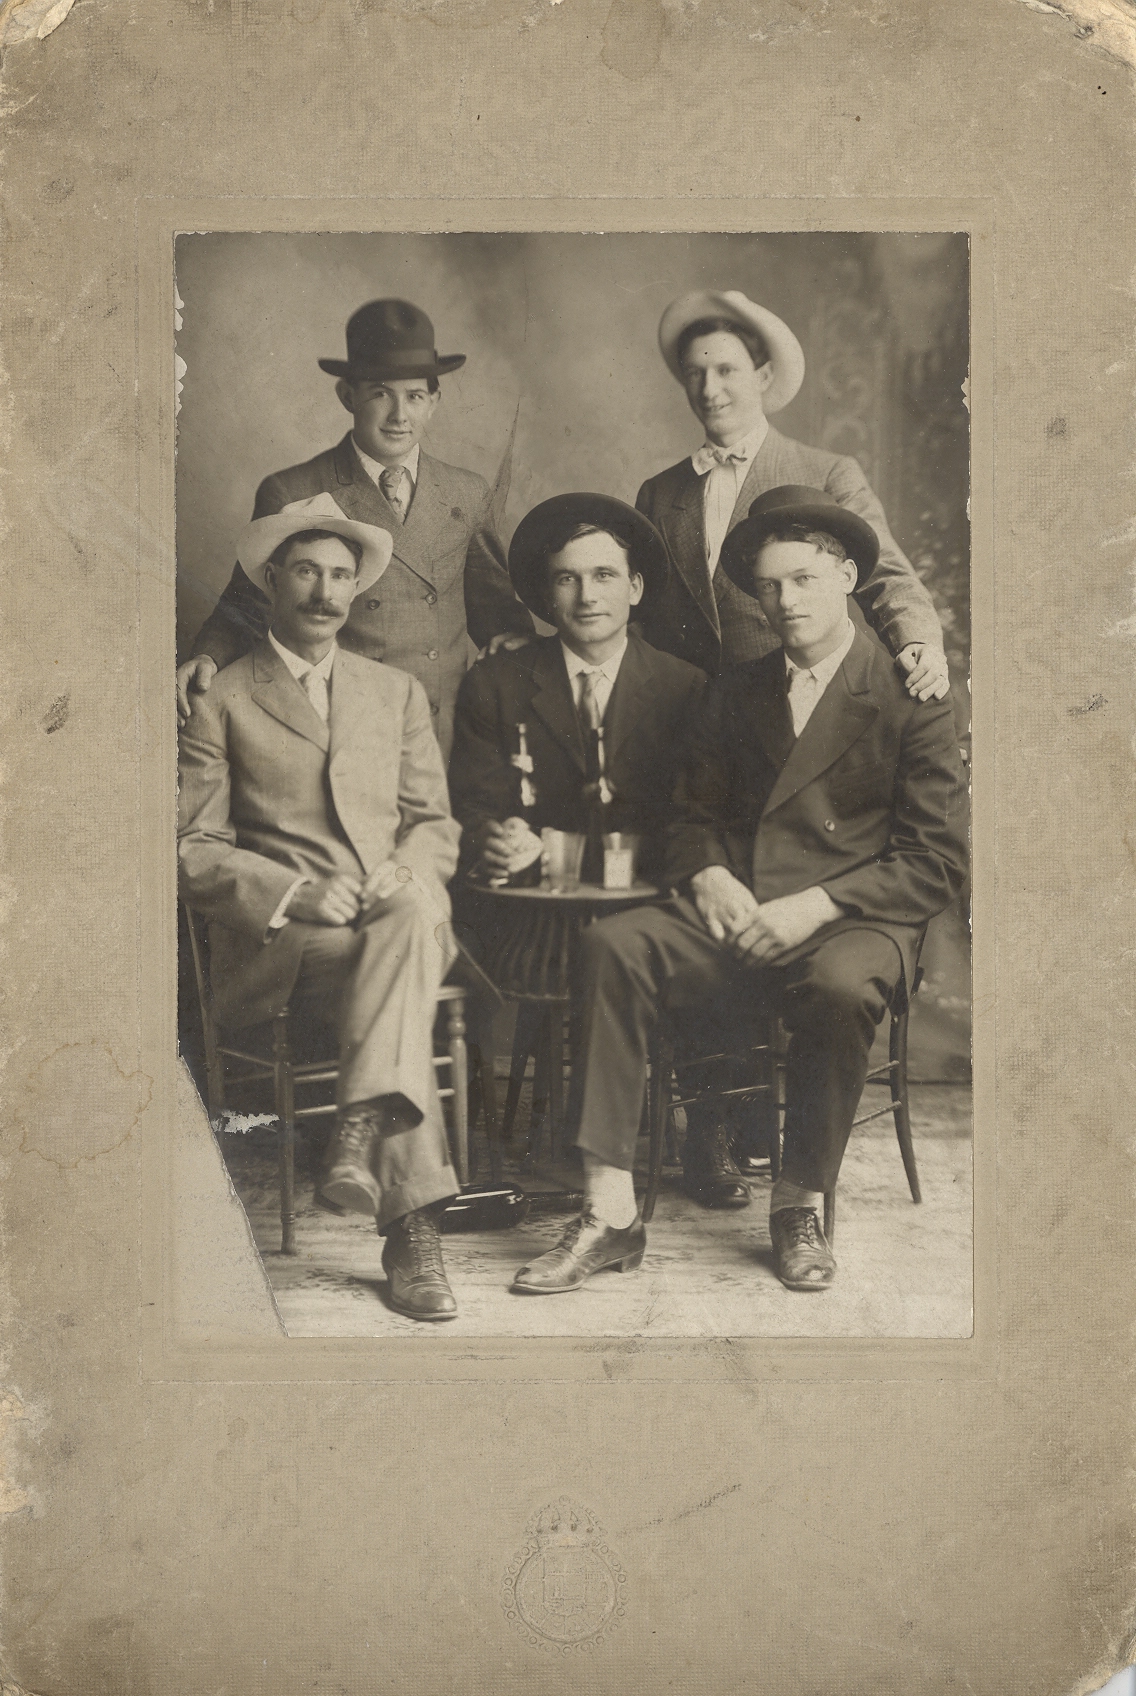 unidentified group of 5 young men